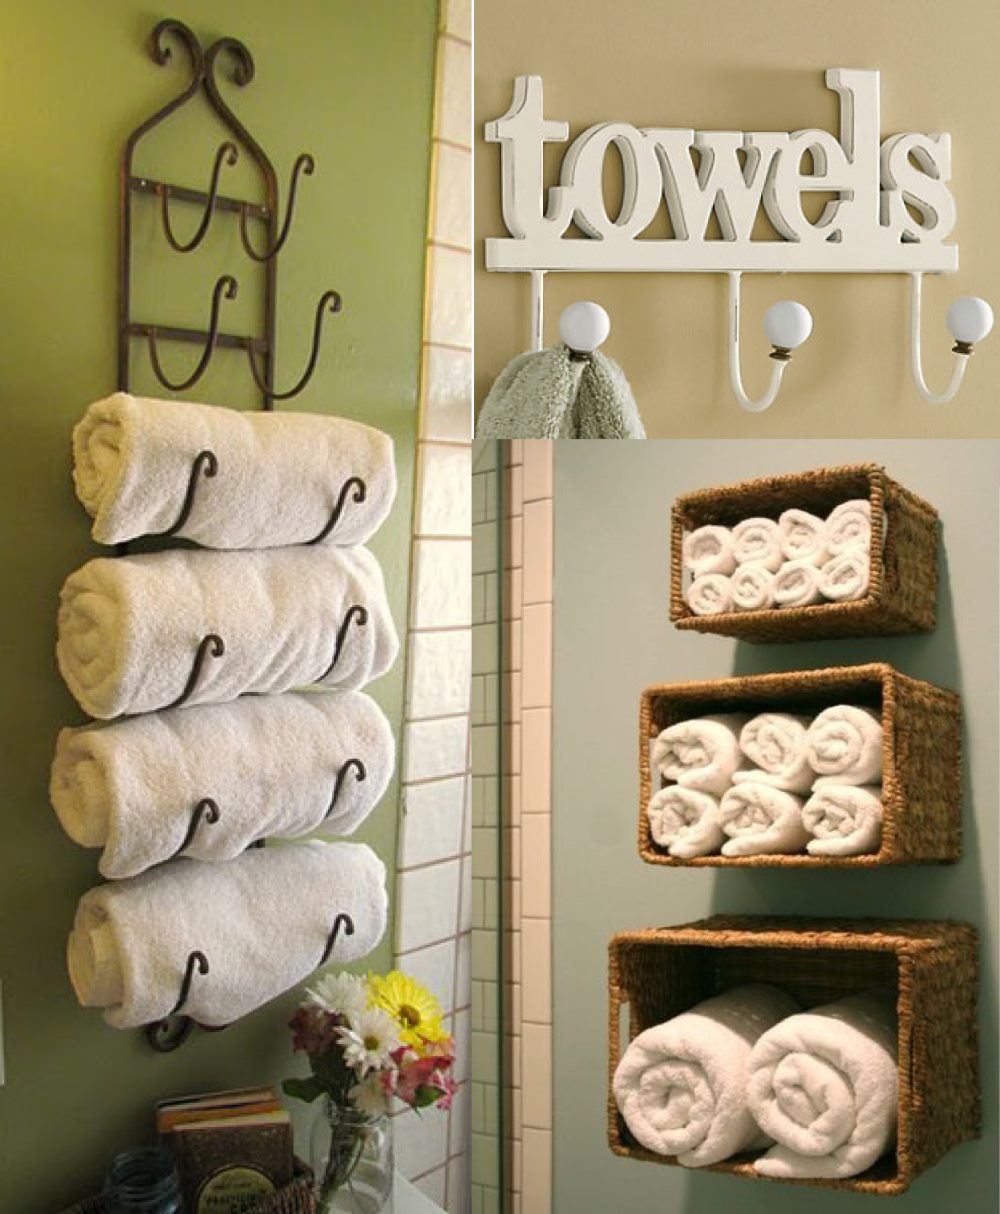 Towel Holders for Rustic and DIY Useful Bathroom Decorations